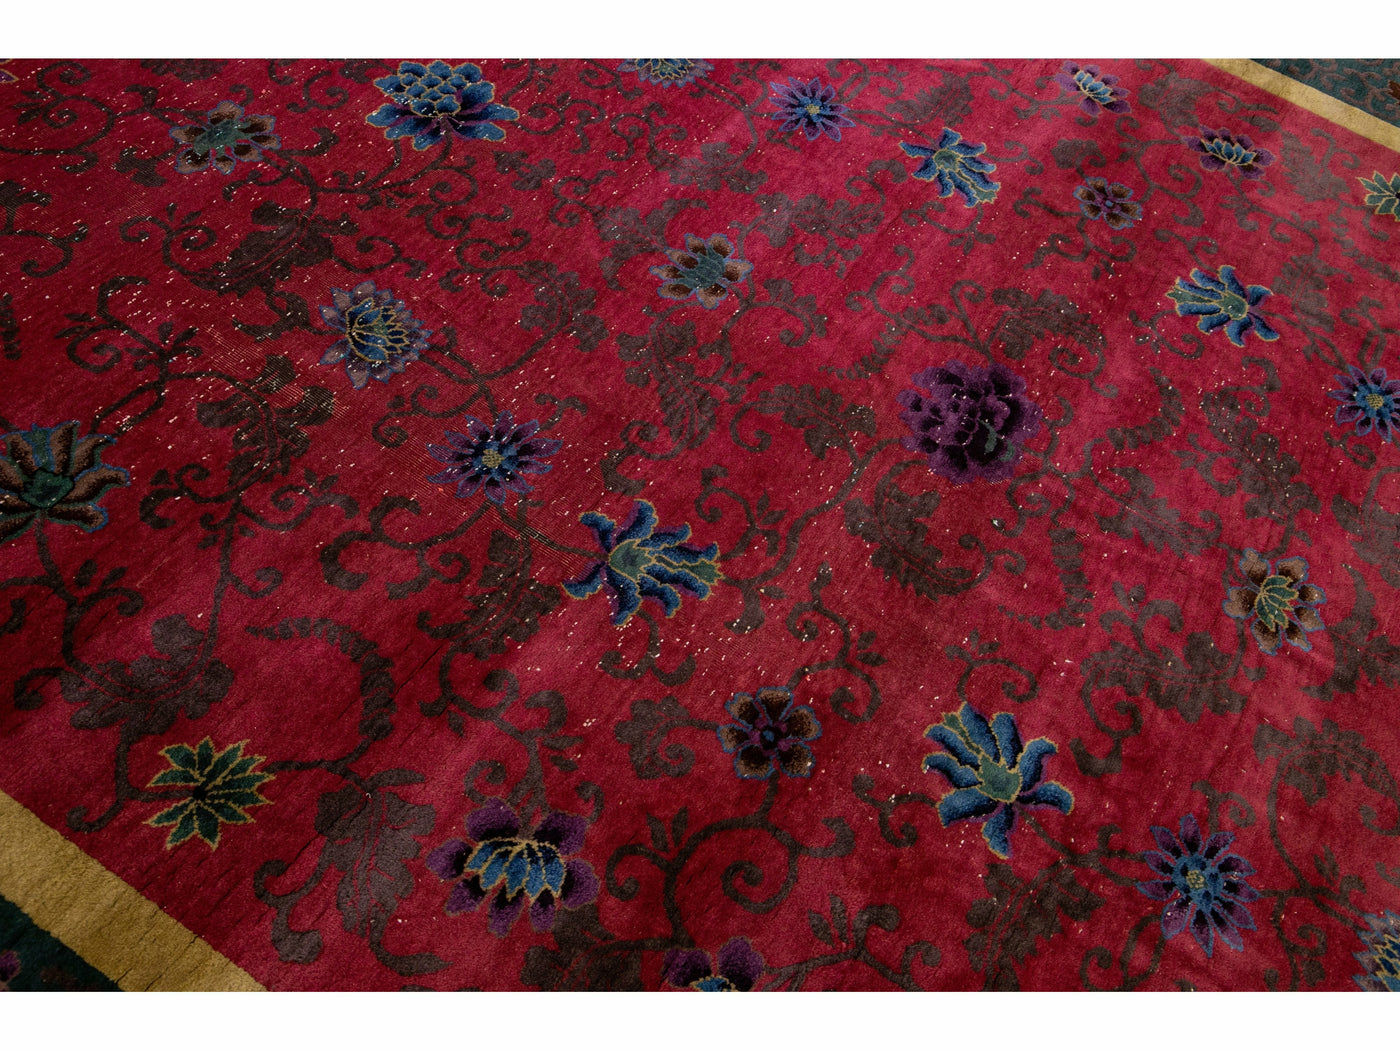 Antique Art Deco Handmade Chinese Floral Red Wool Rug